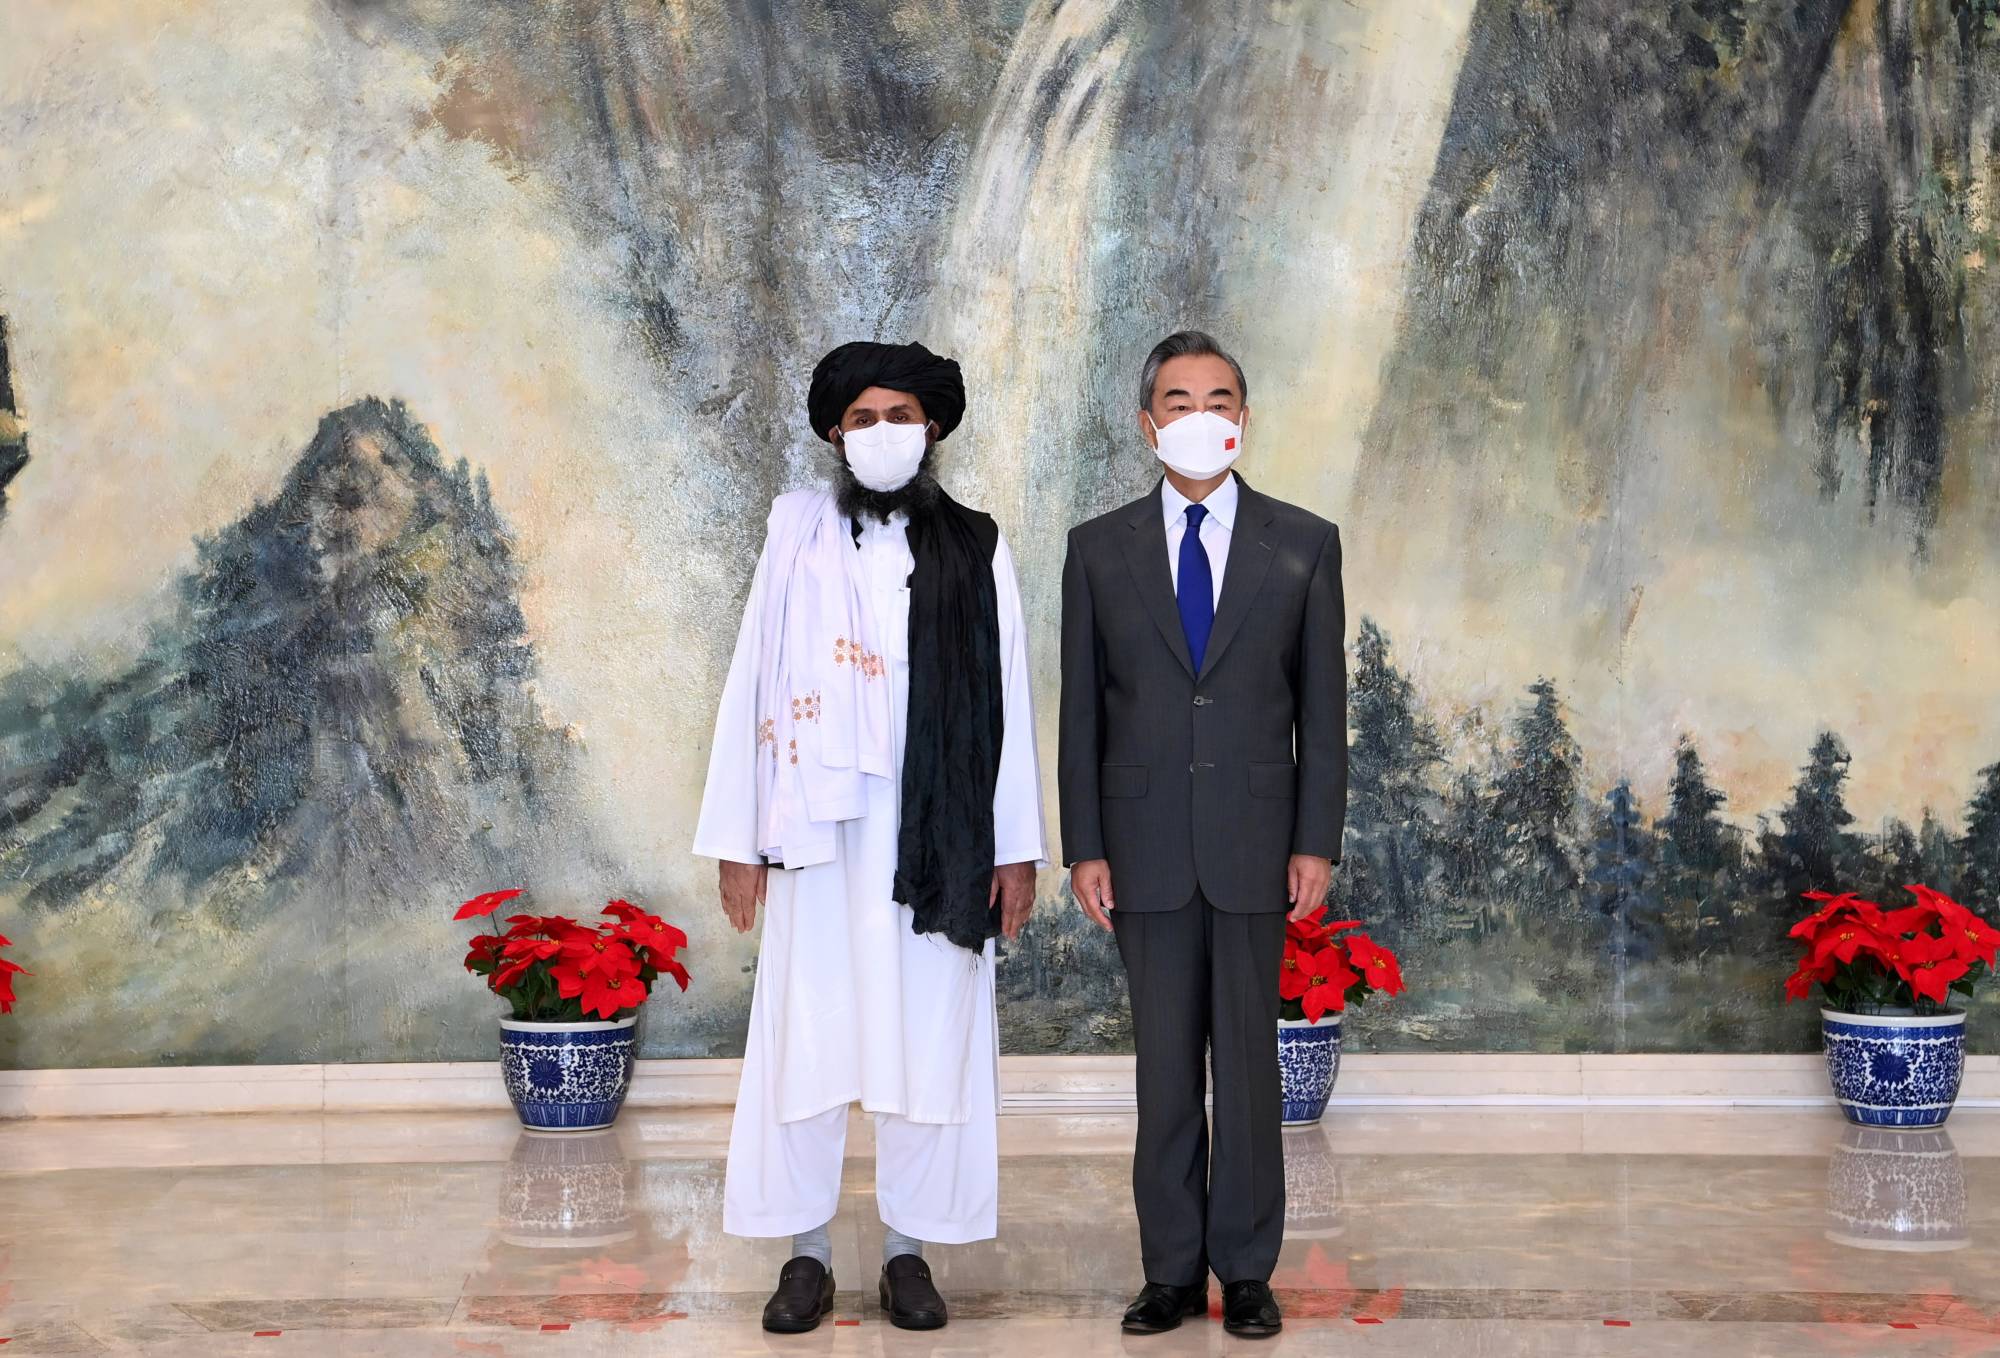 Mullah Abdul Ghani Baradar, political chief of the Taliban, meets with Chinese State Councilor and Foreign Minister Wang Yi in Tianjin, China, on July 28. | XINHUA / VIA REUTERS